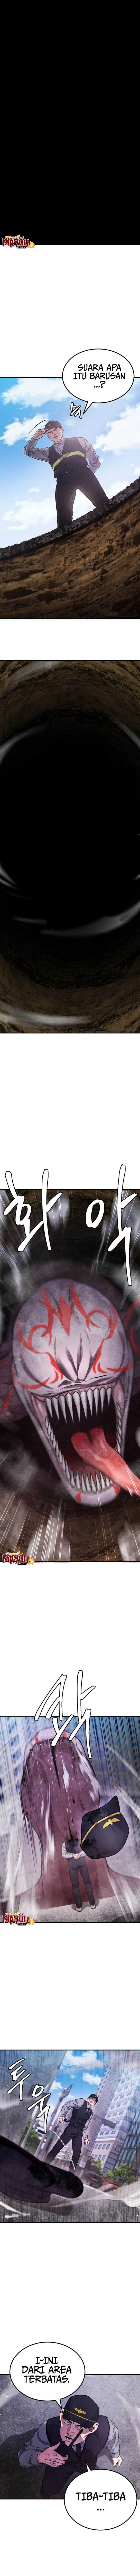 Monsters (2022) Chapter 40